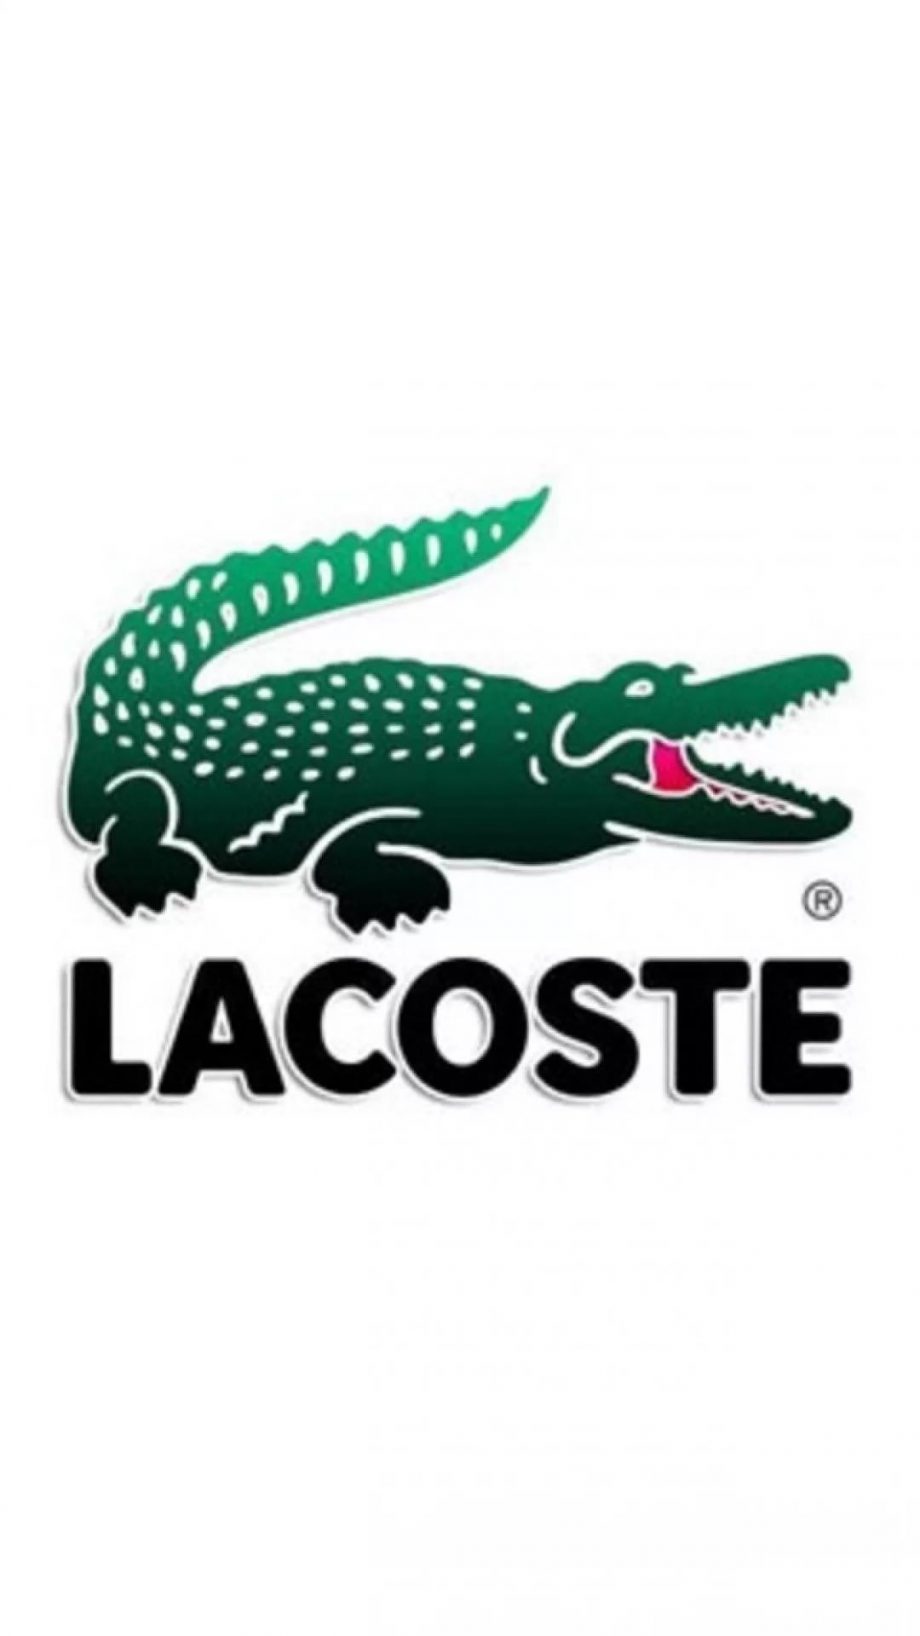 4 Lacoste iPhone Wallpapers - Wallpaperboat